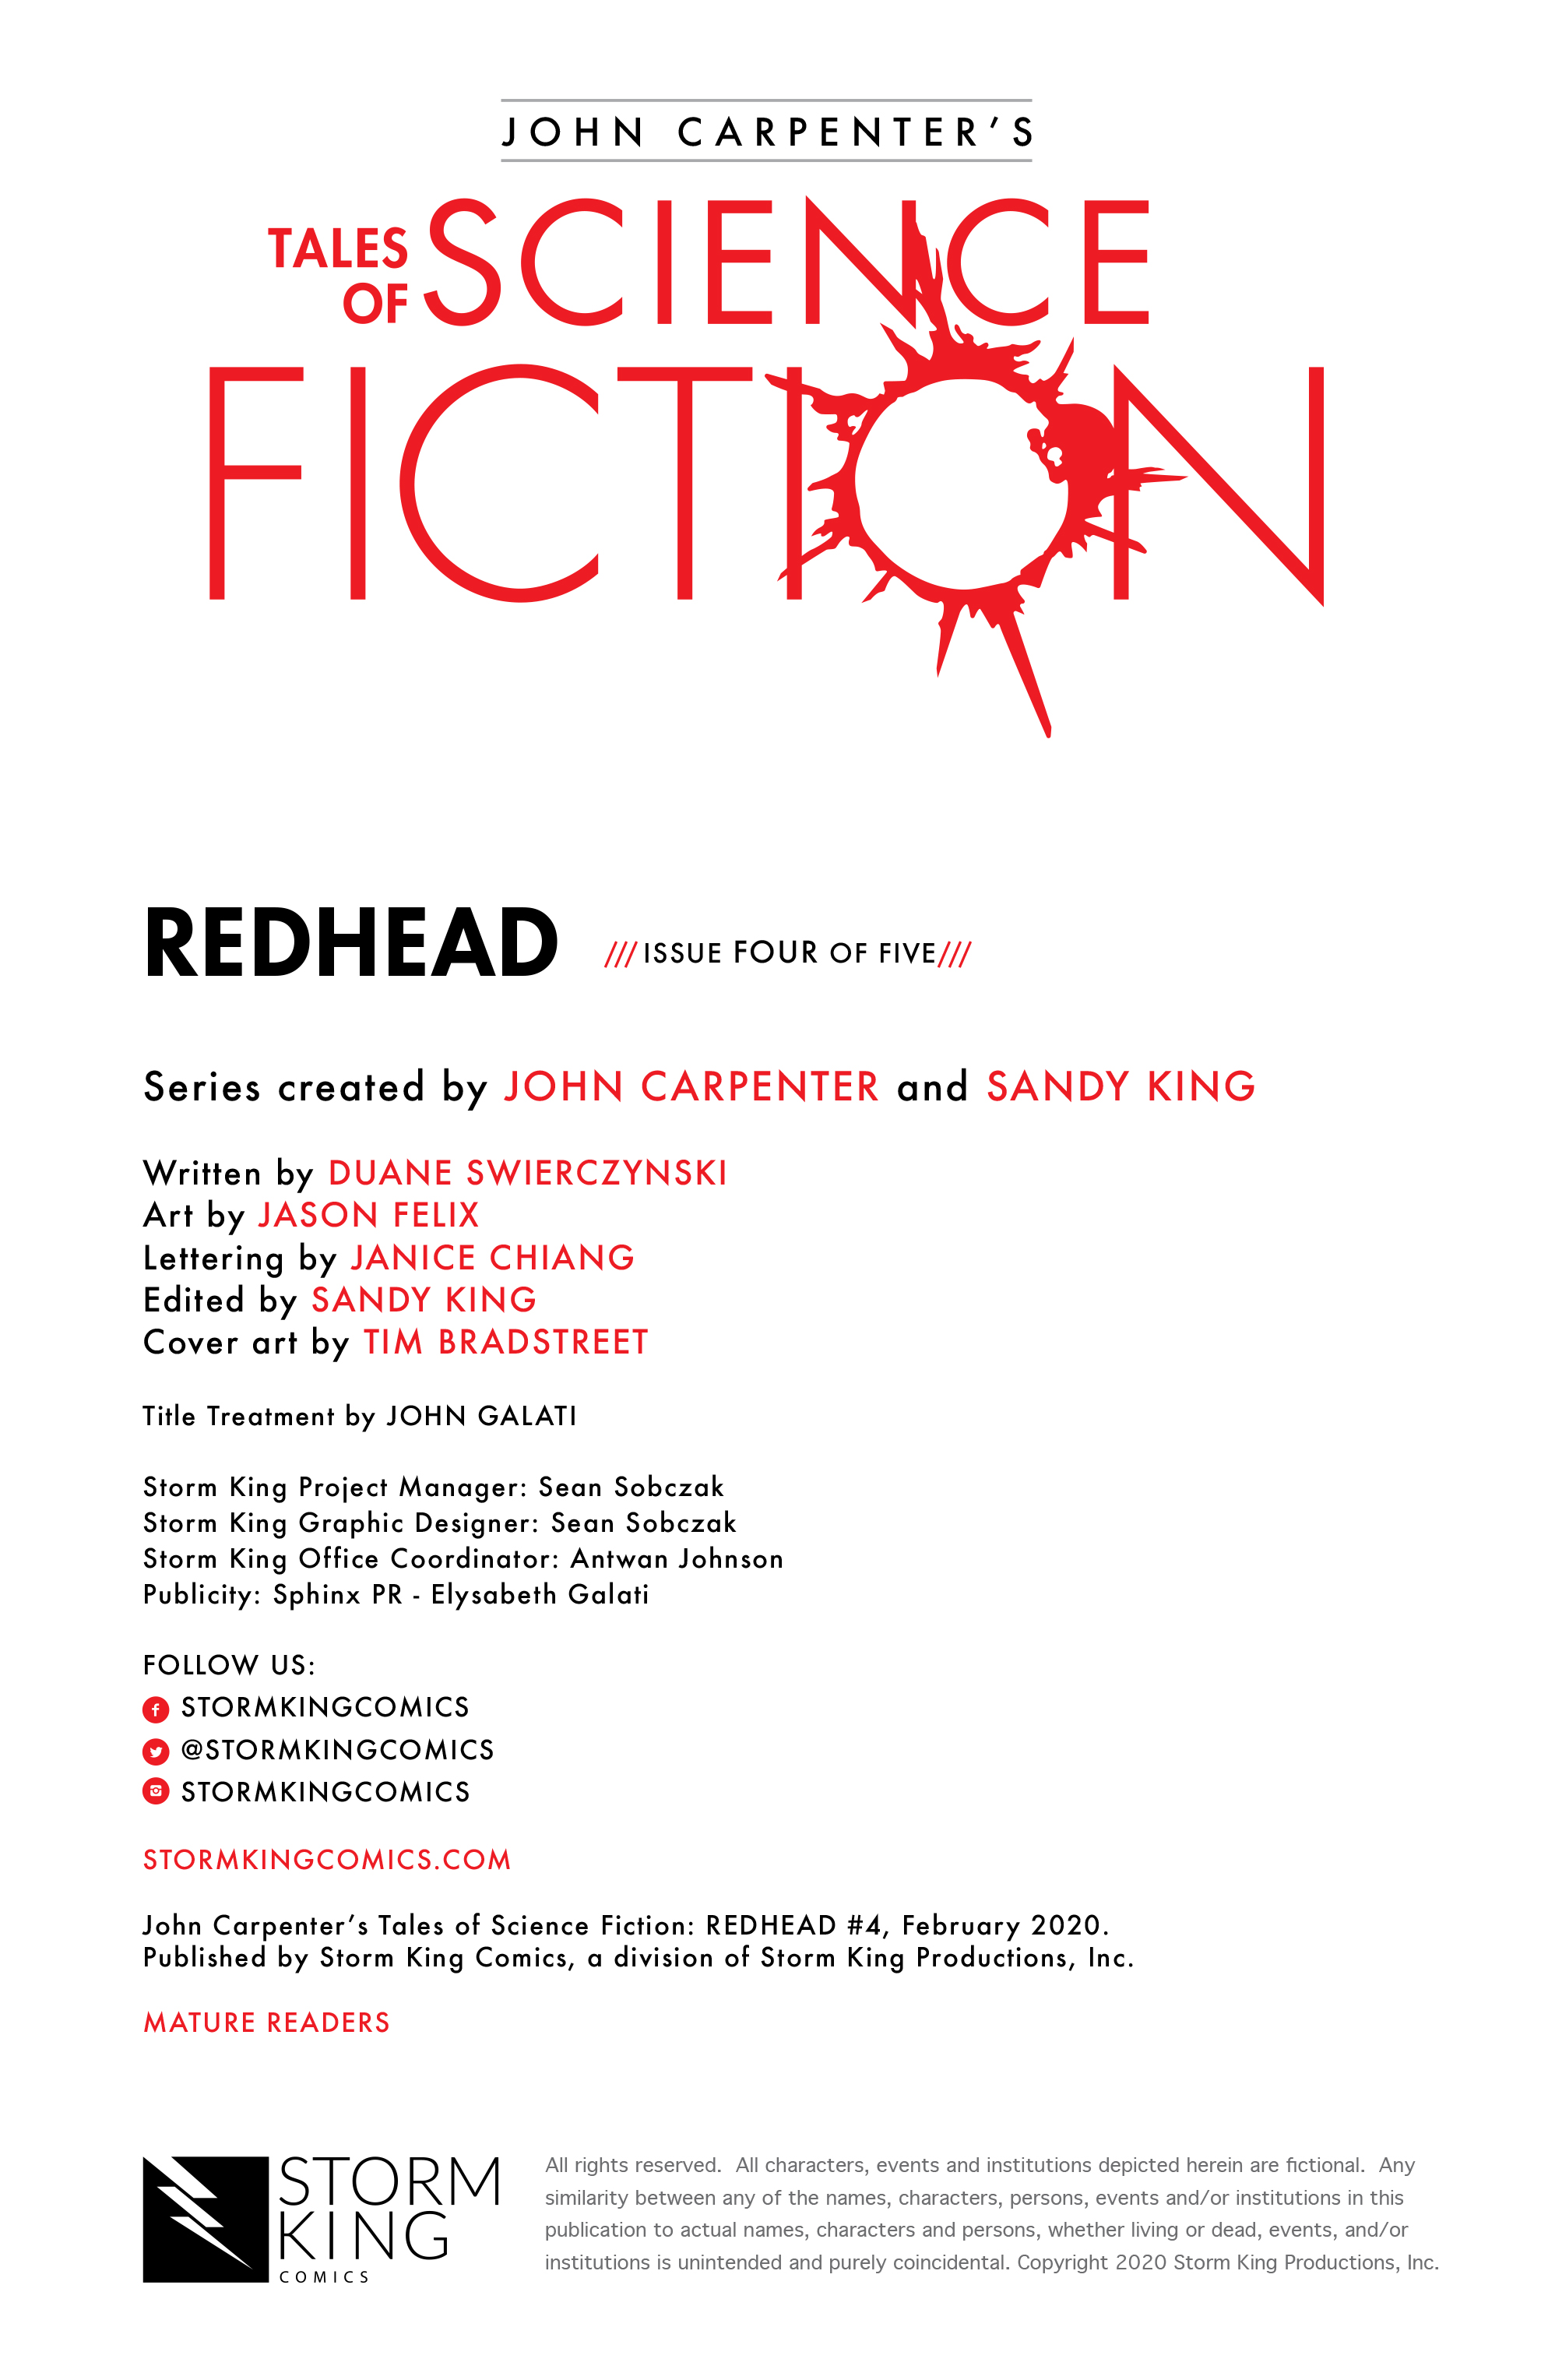 Read online John Carpenter's Tales of Science Fiction: Redhead comic -  Issue #4 - 2